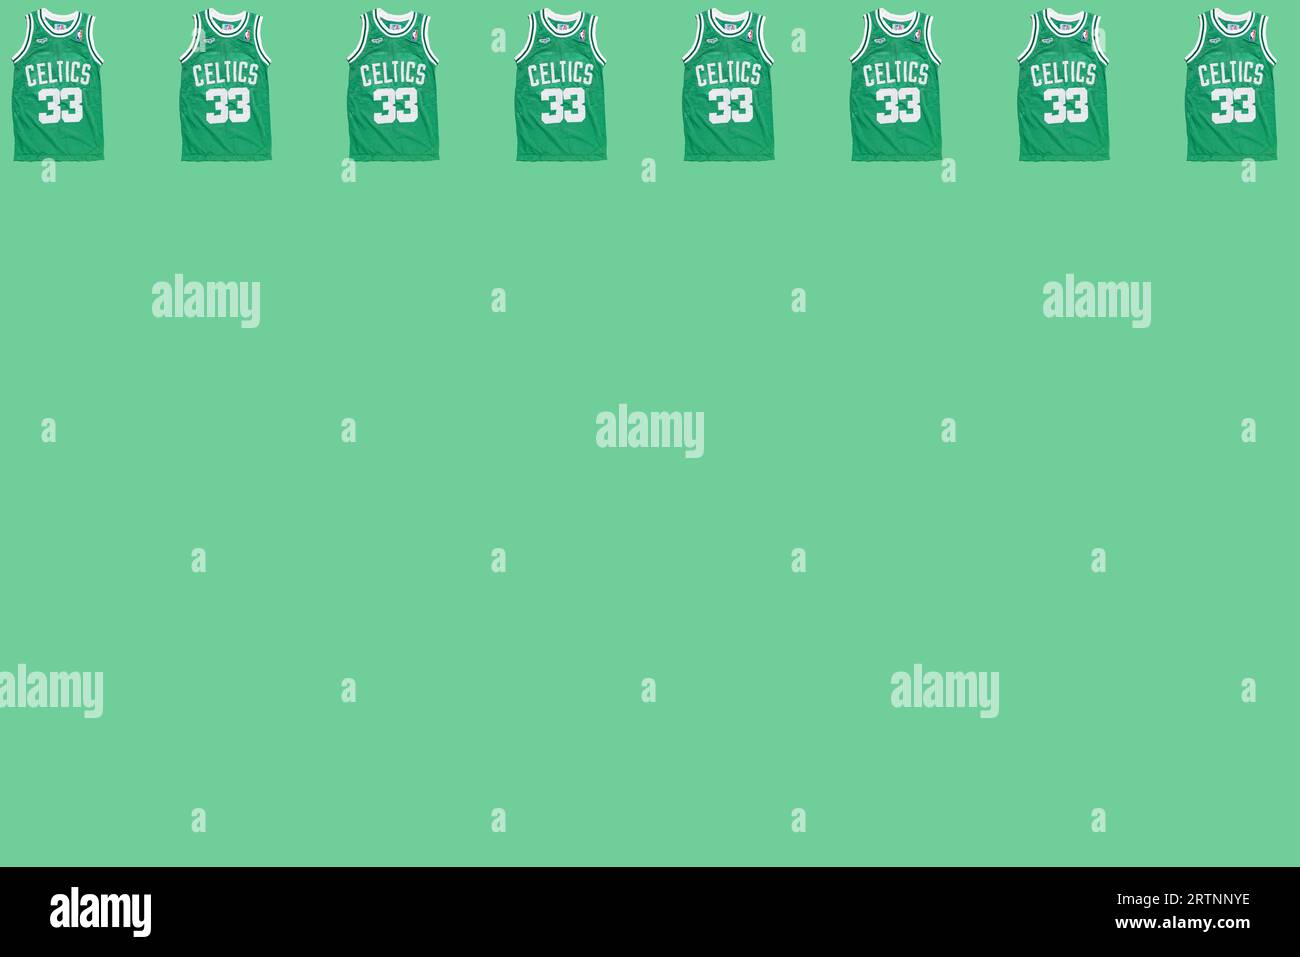 Boston Celtics retro green basketball jersey pattern featuring Larry Bird's number 33, on top, on green background. Basketball, spalding, sports equip Stock Photo